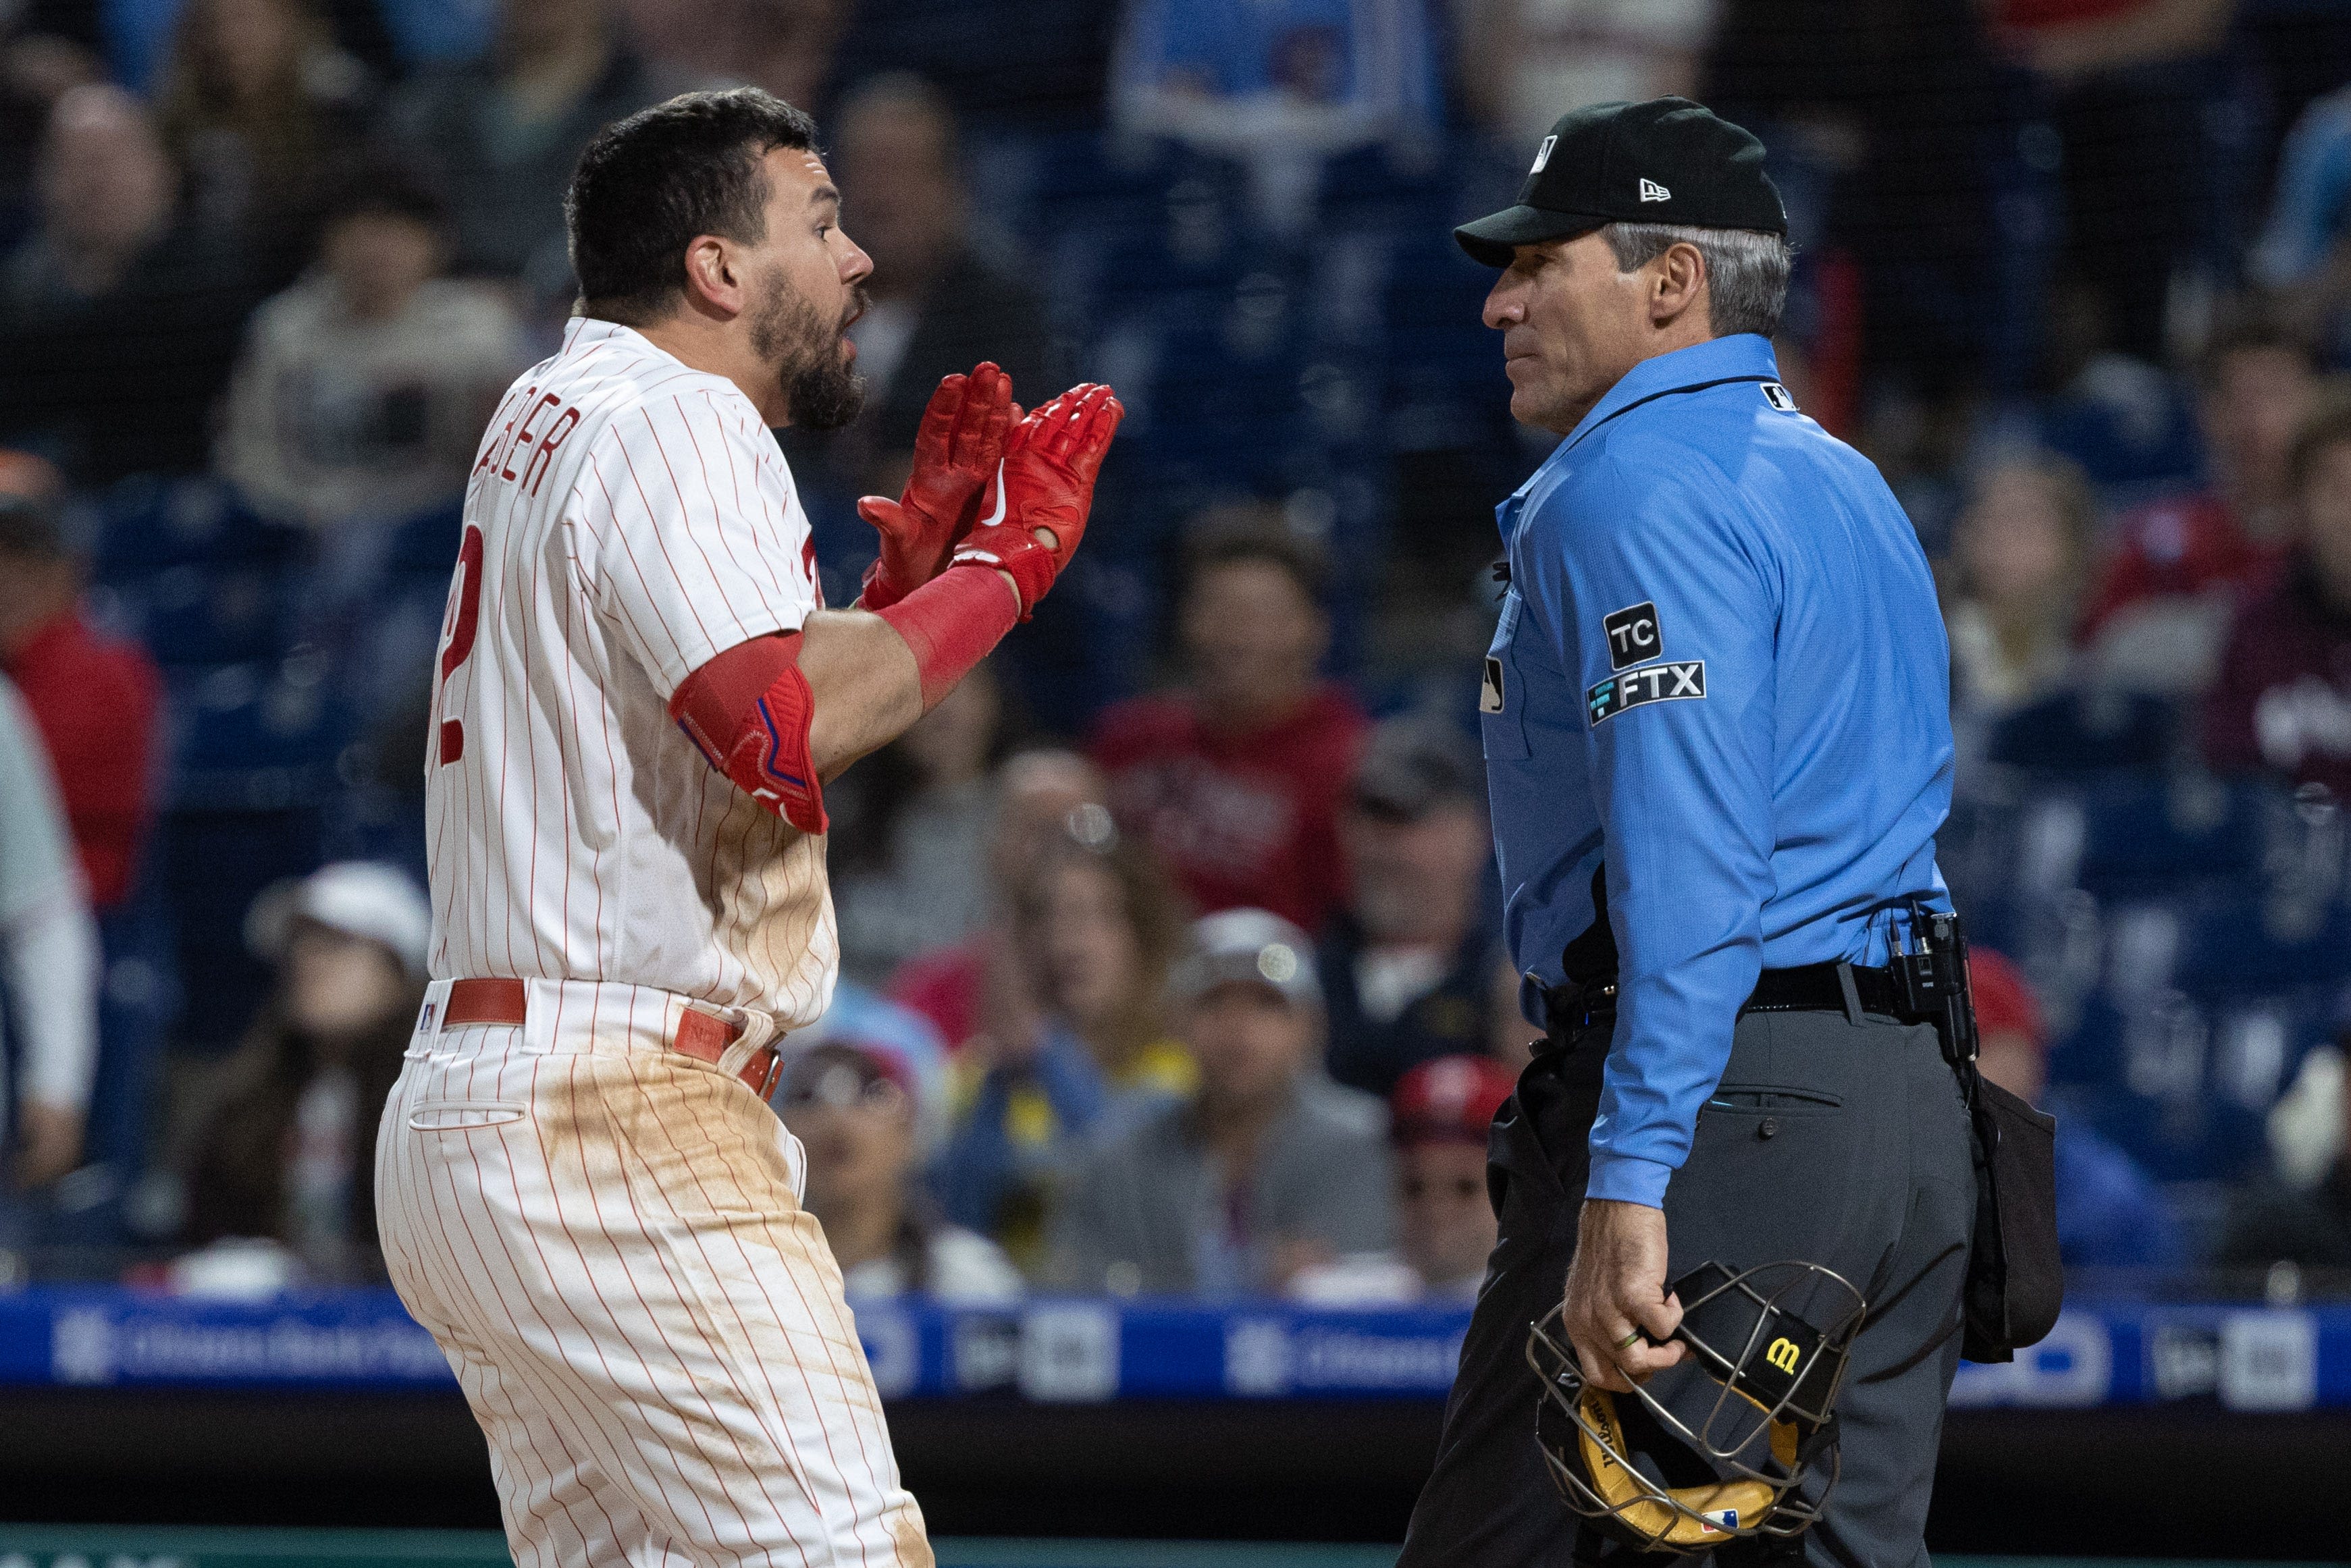 Ángel Hernández is retiring: A look at his most memorably infamous umpiring calls